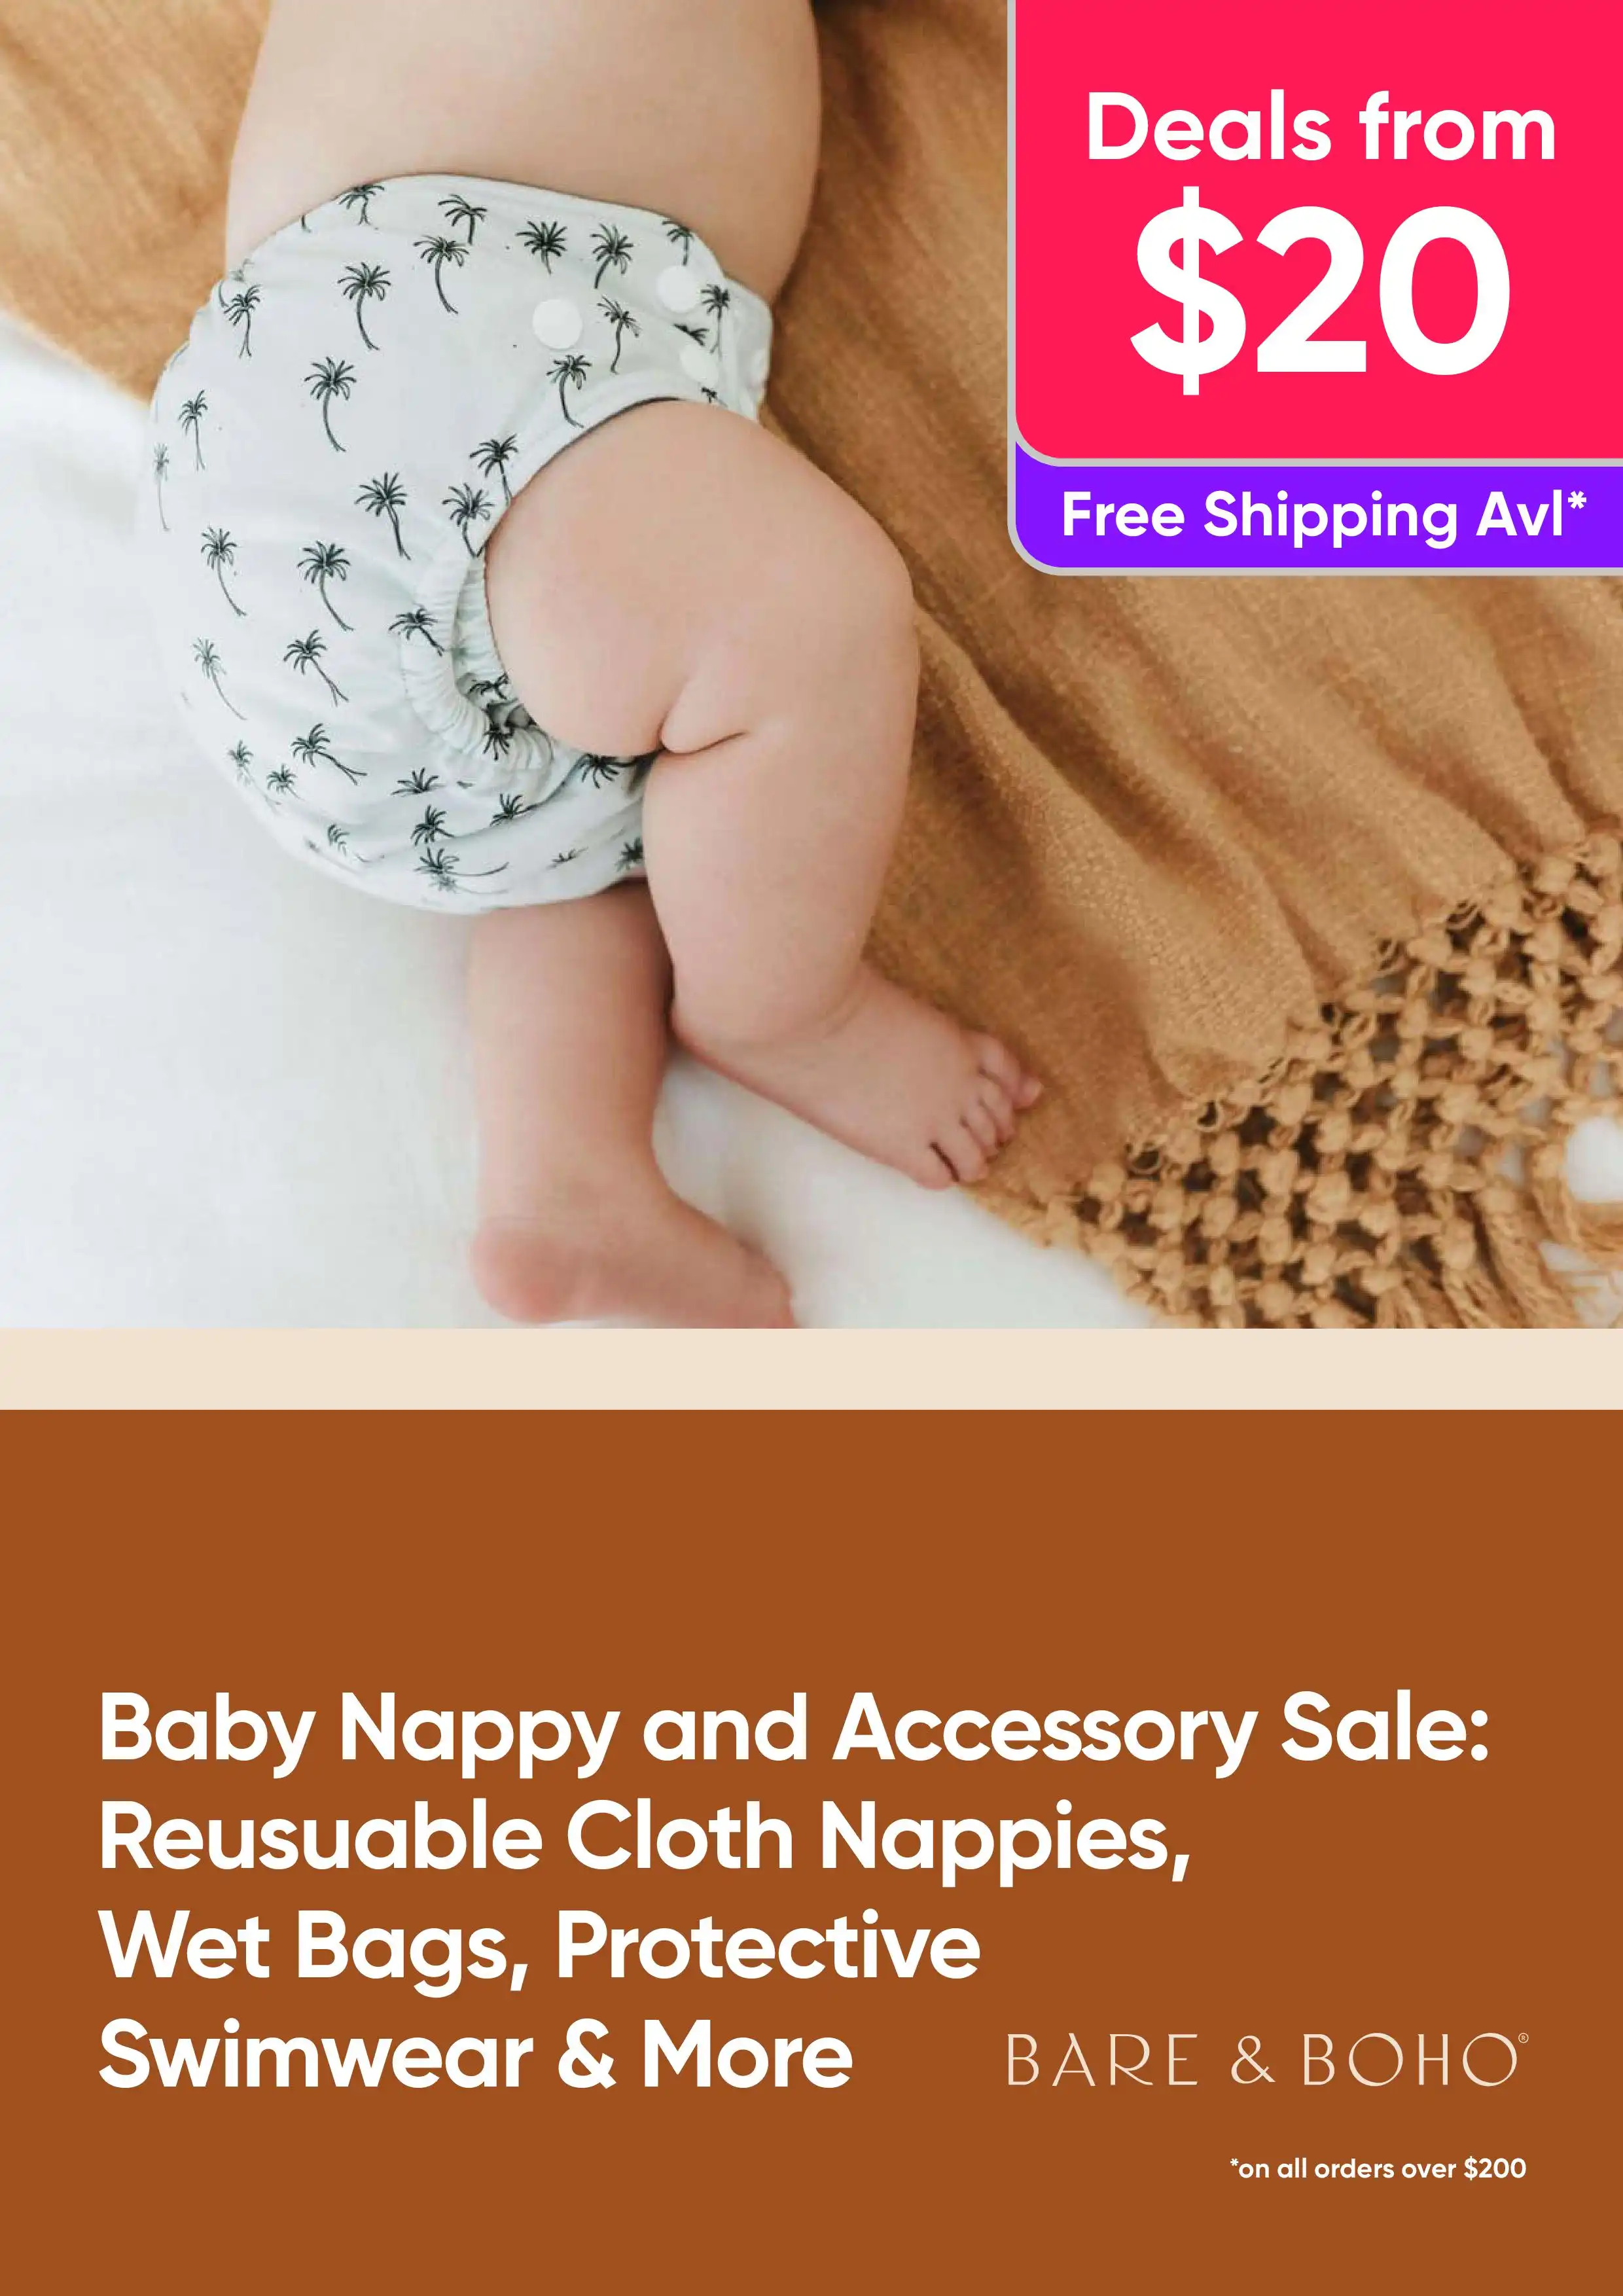 Baby Nappy and Accessory Sale: Reusable Cloth Nappies, Wet Bags, Protective Swimwear and More - up to 60% off